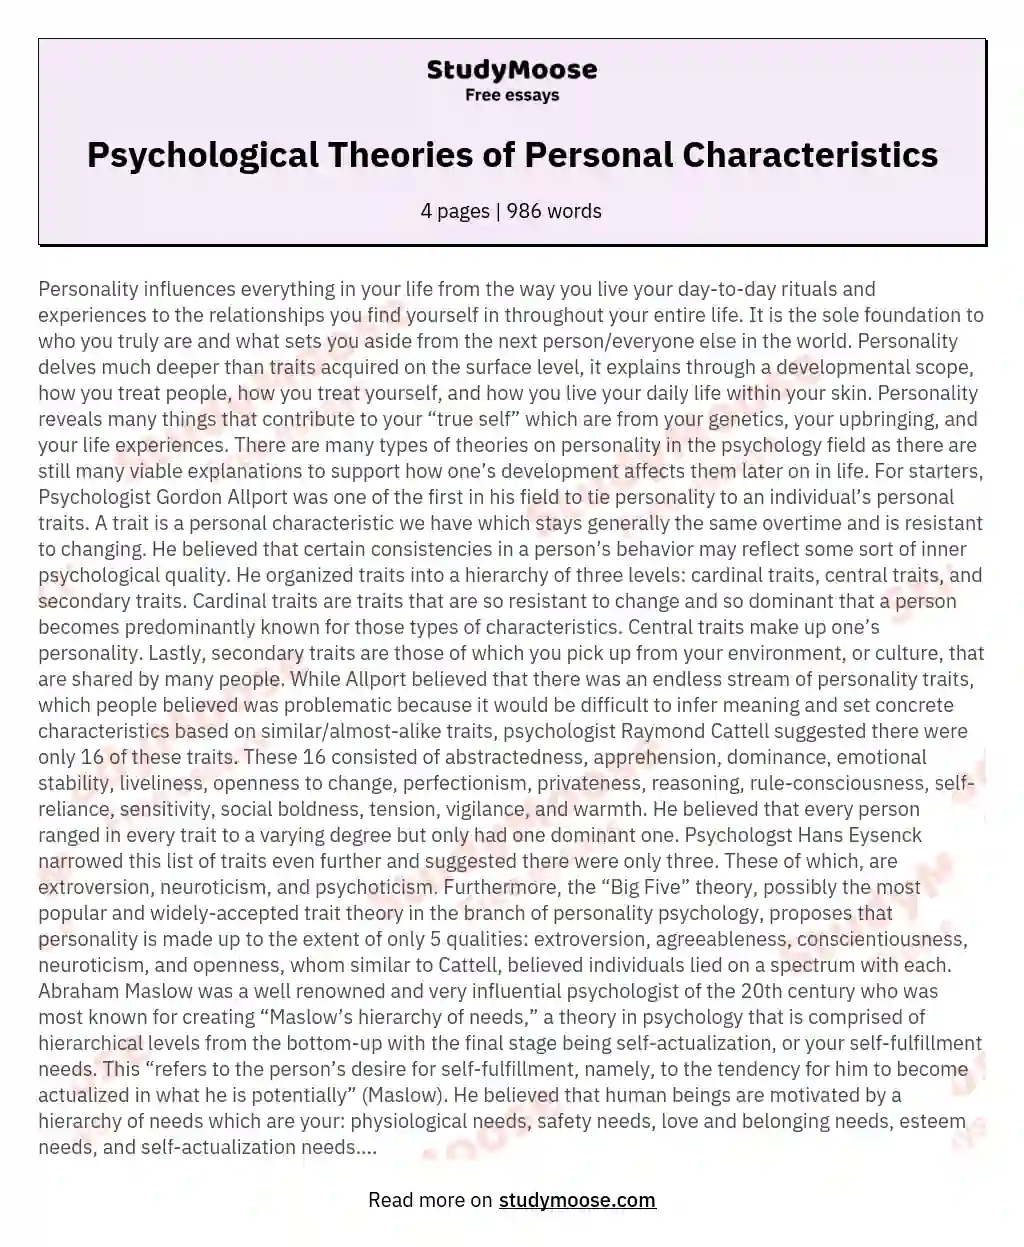 Psychological Theories of Personal Characteristics essay